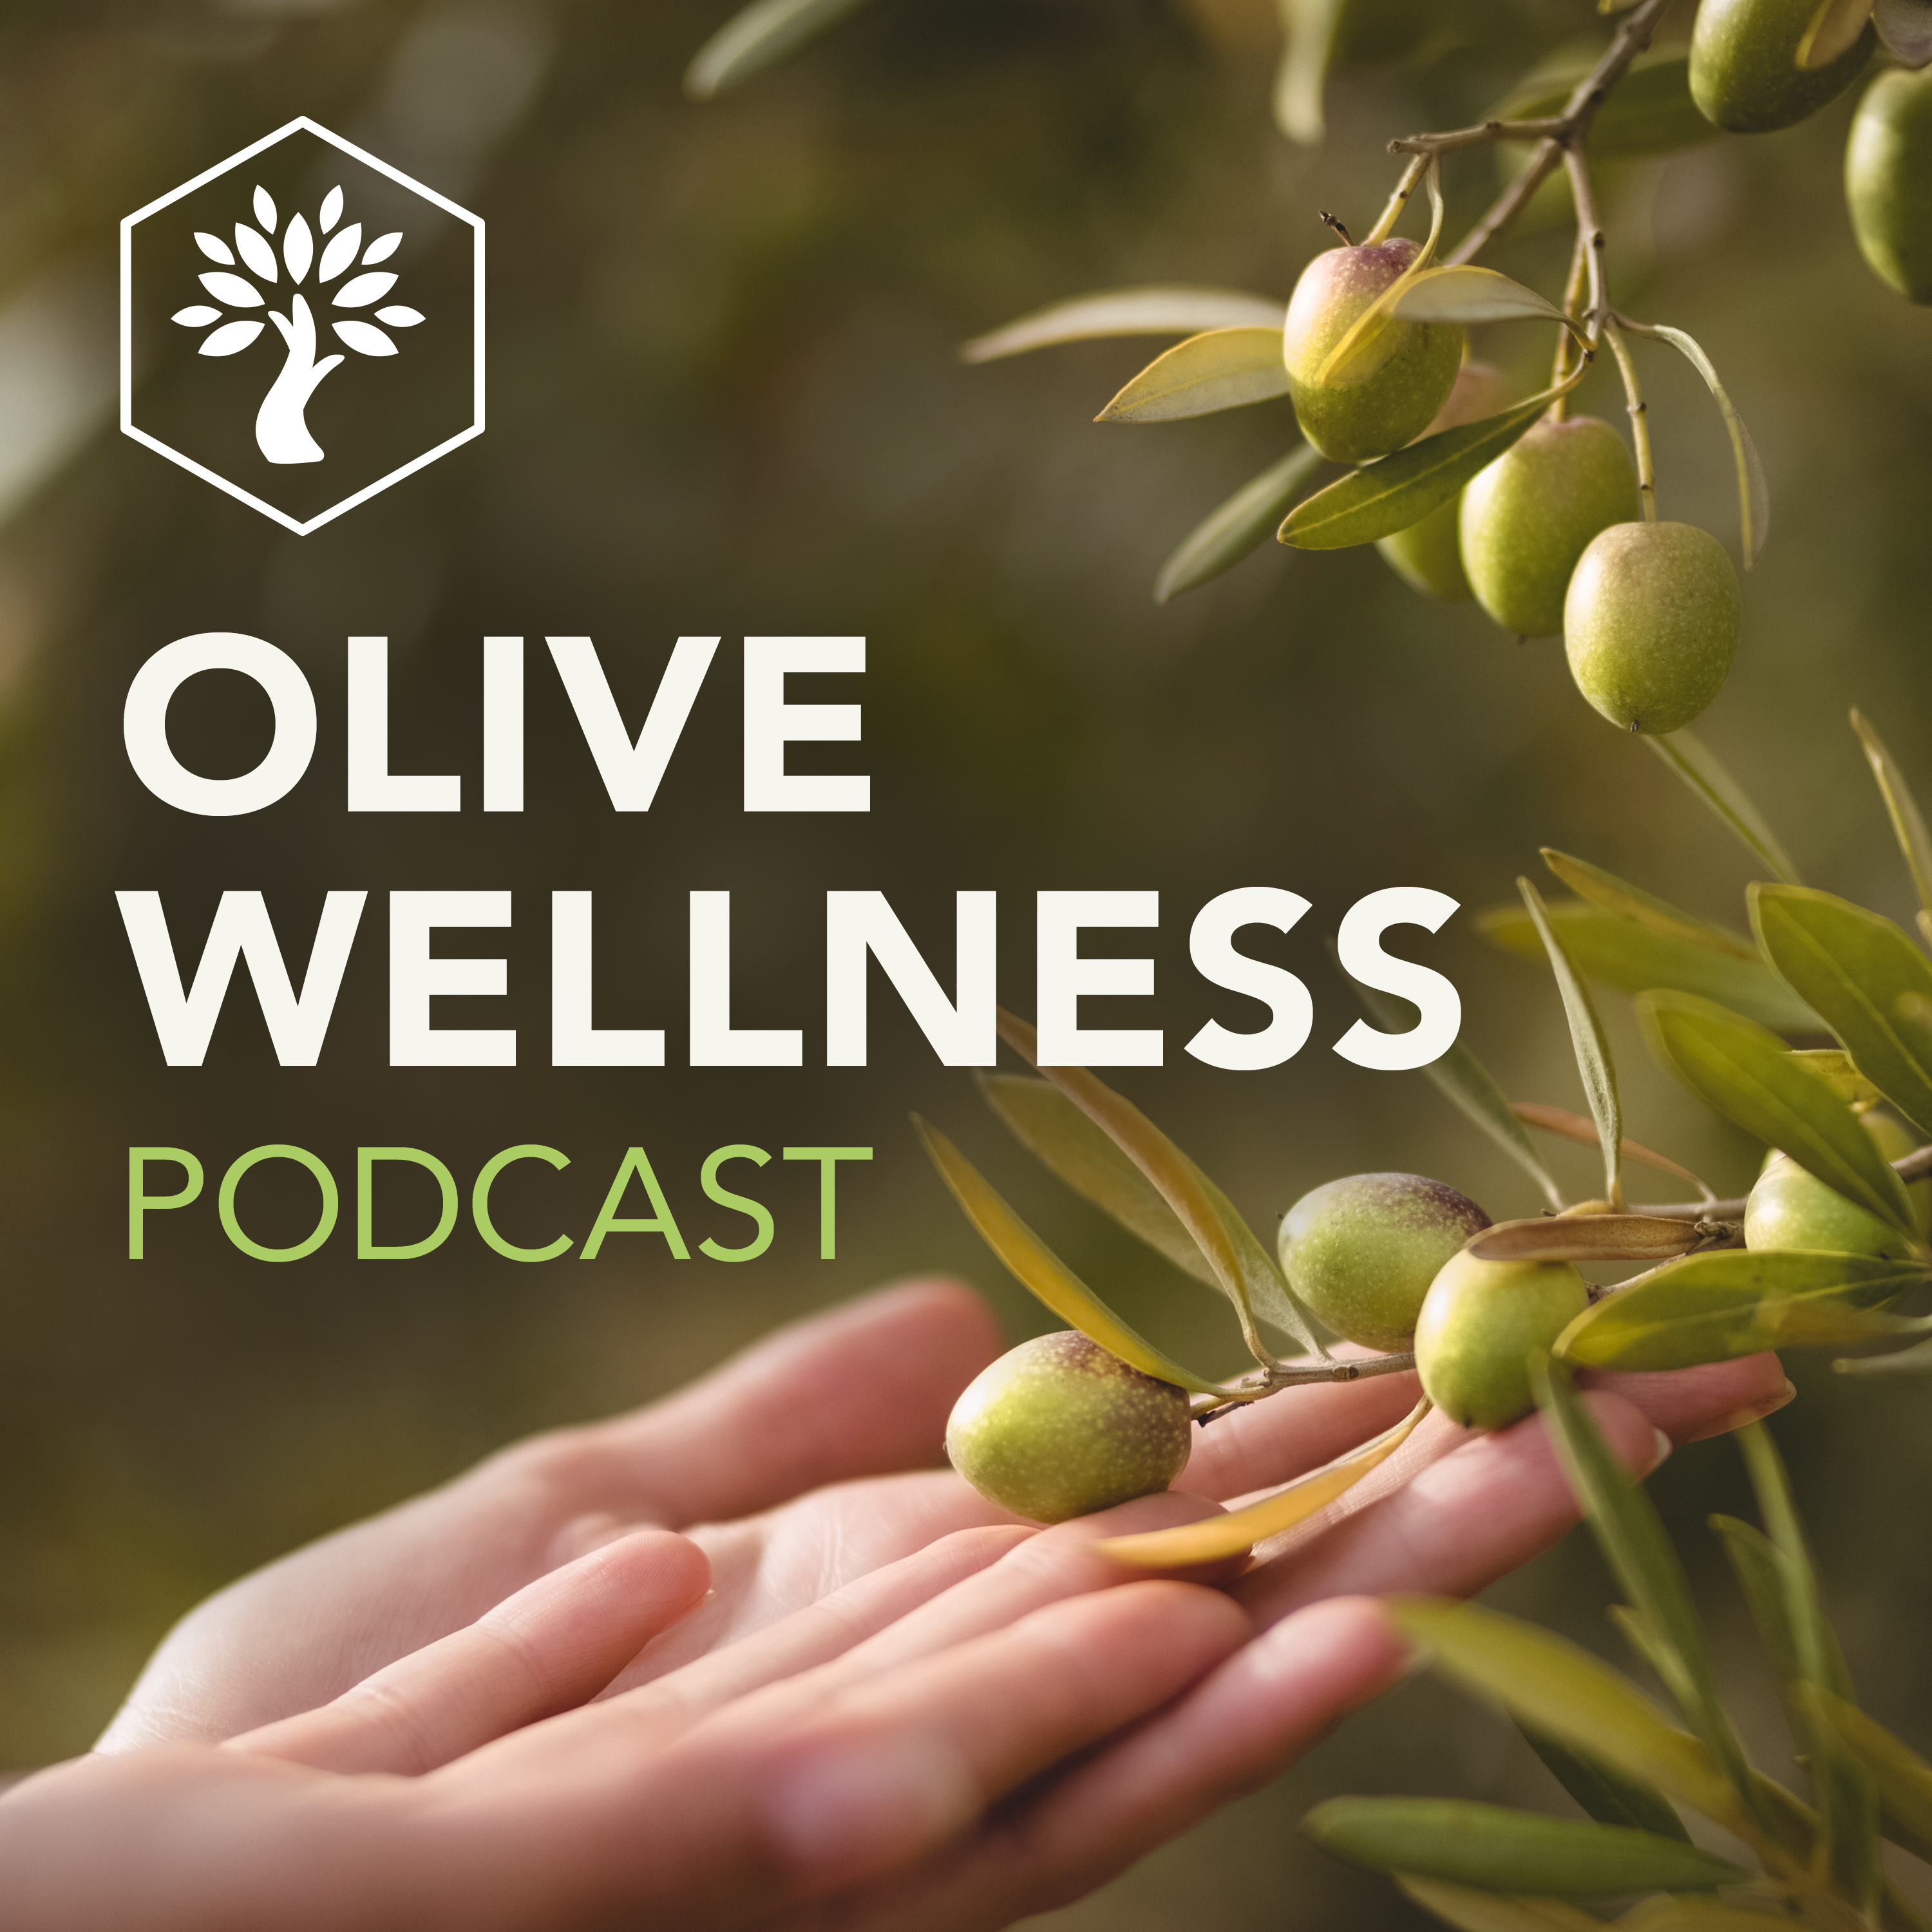 The many health benefits of Olive Leaf Extract